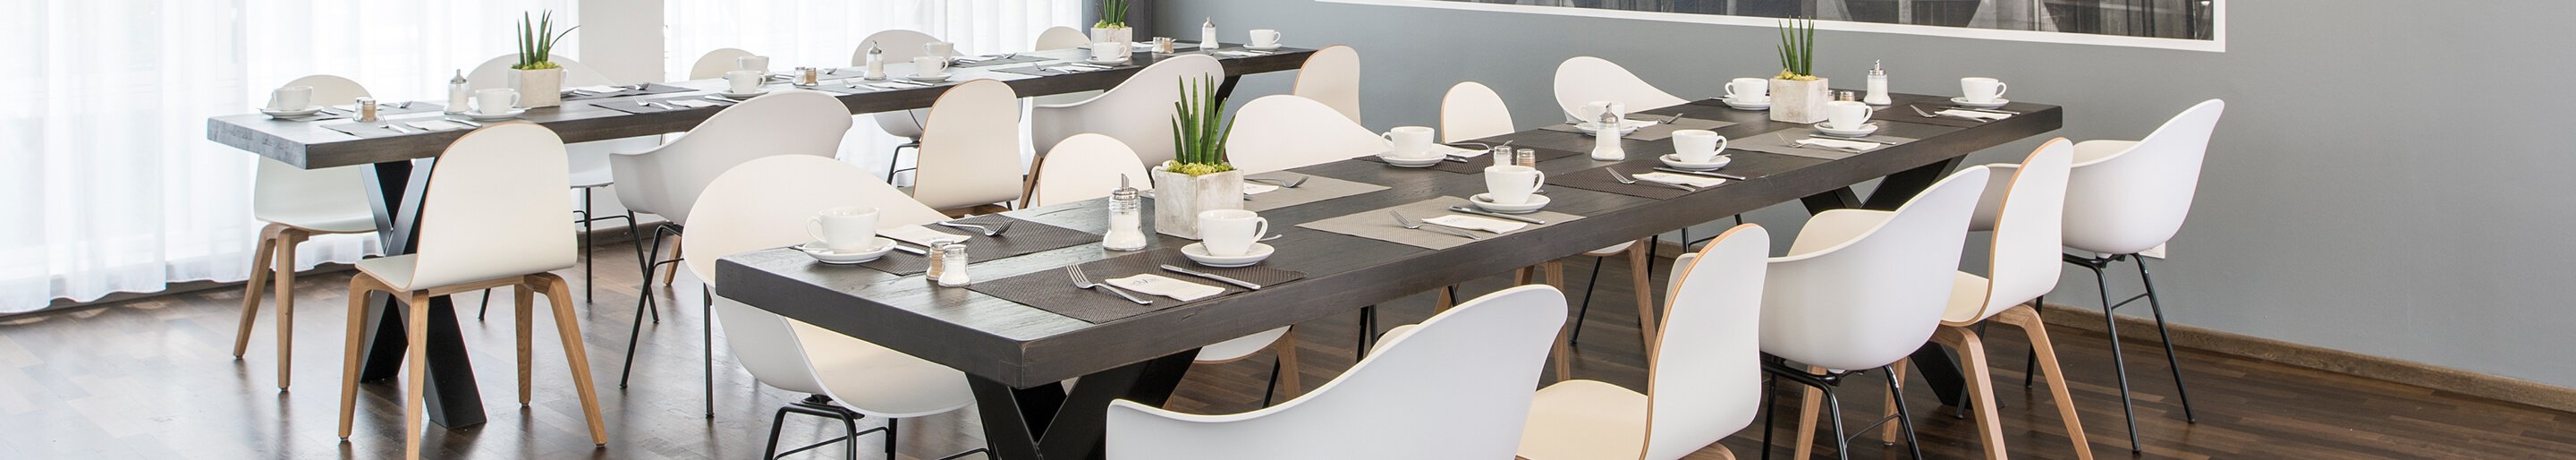 Indoor Chair systems for your restaurant or hotel